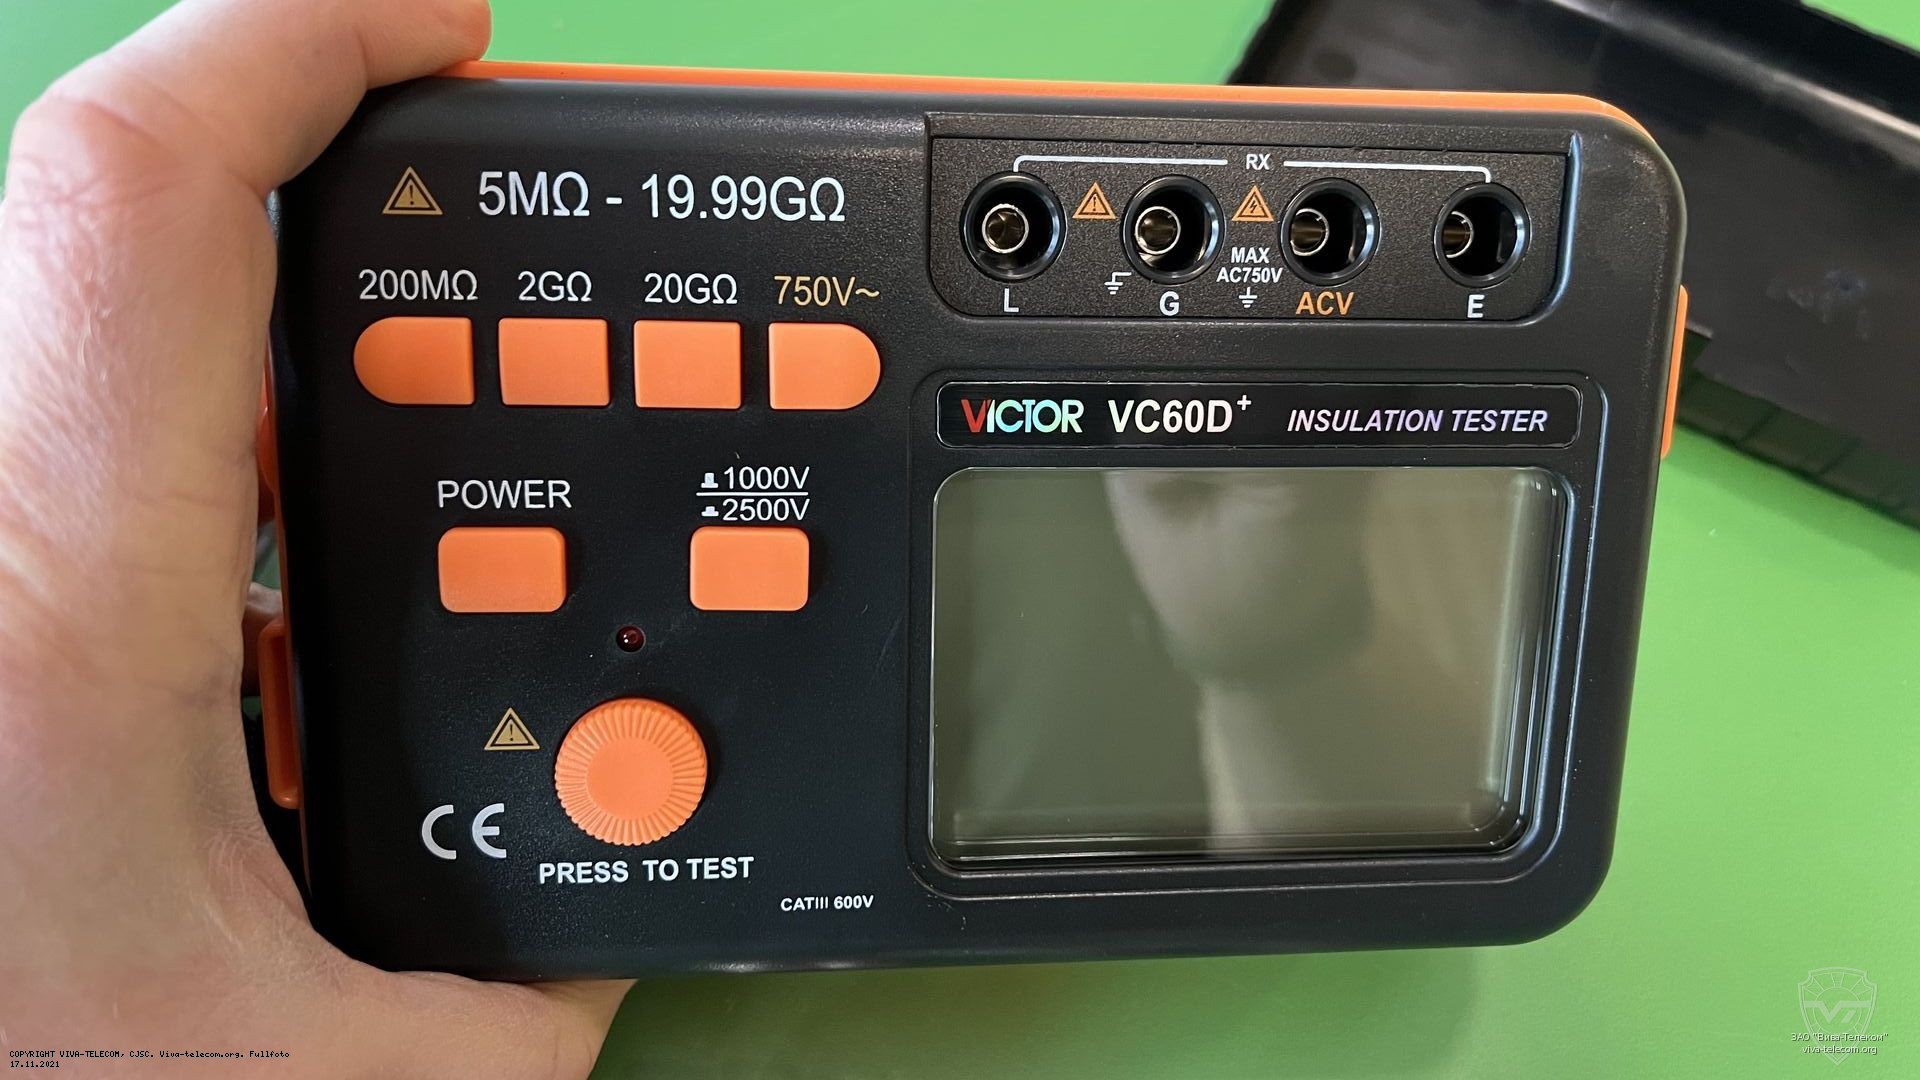   Victor VC60D+